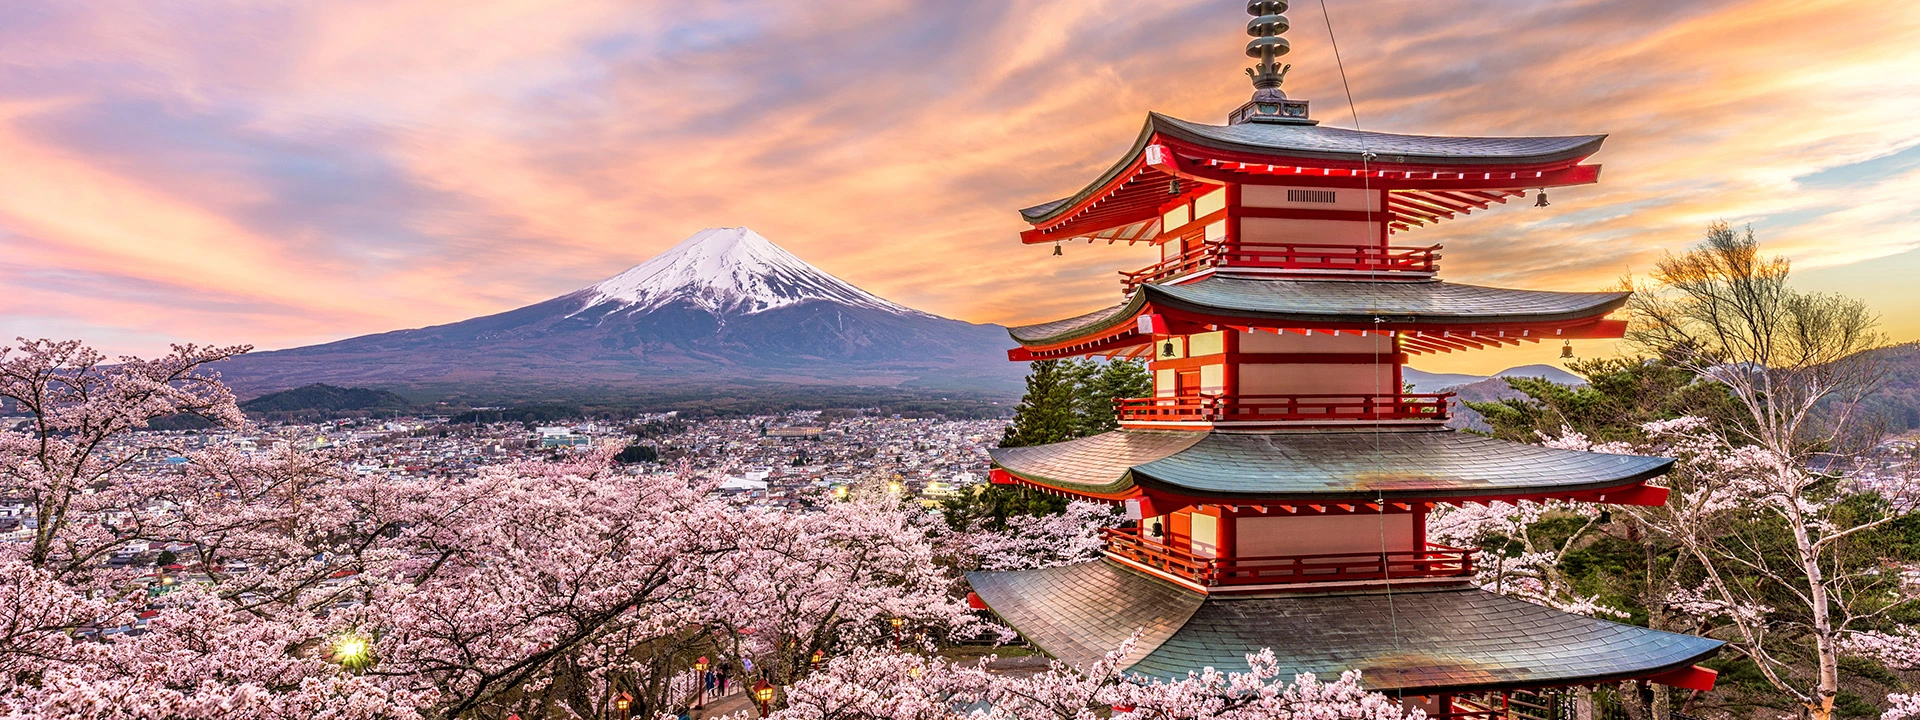 Japanese temple and view of Mount Fuji at sunset